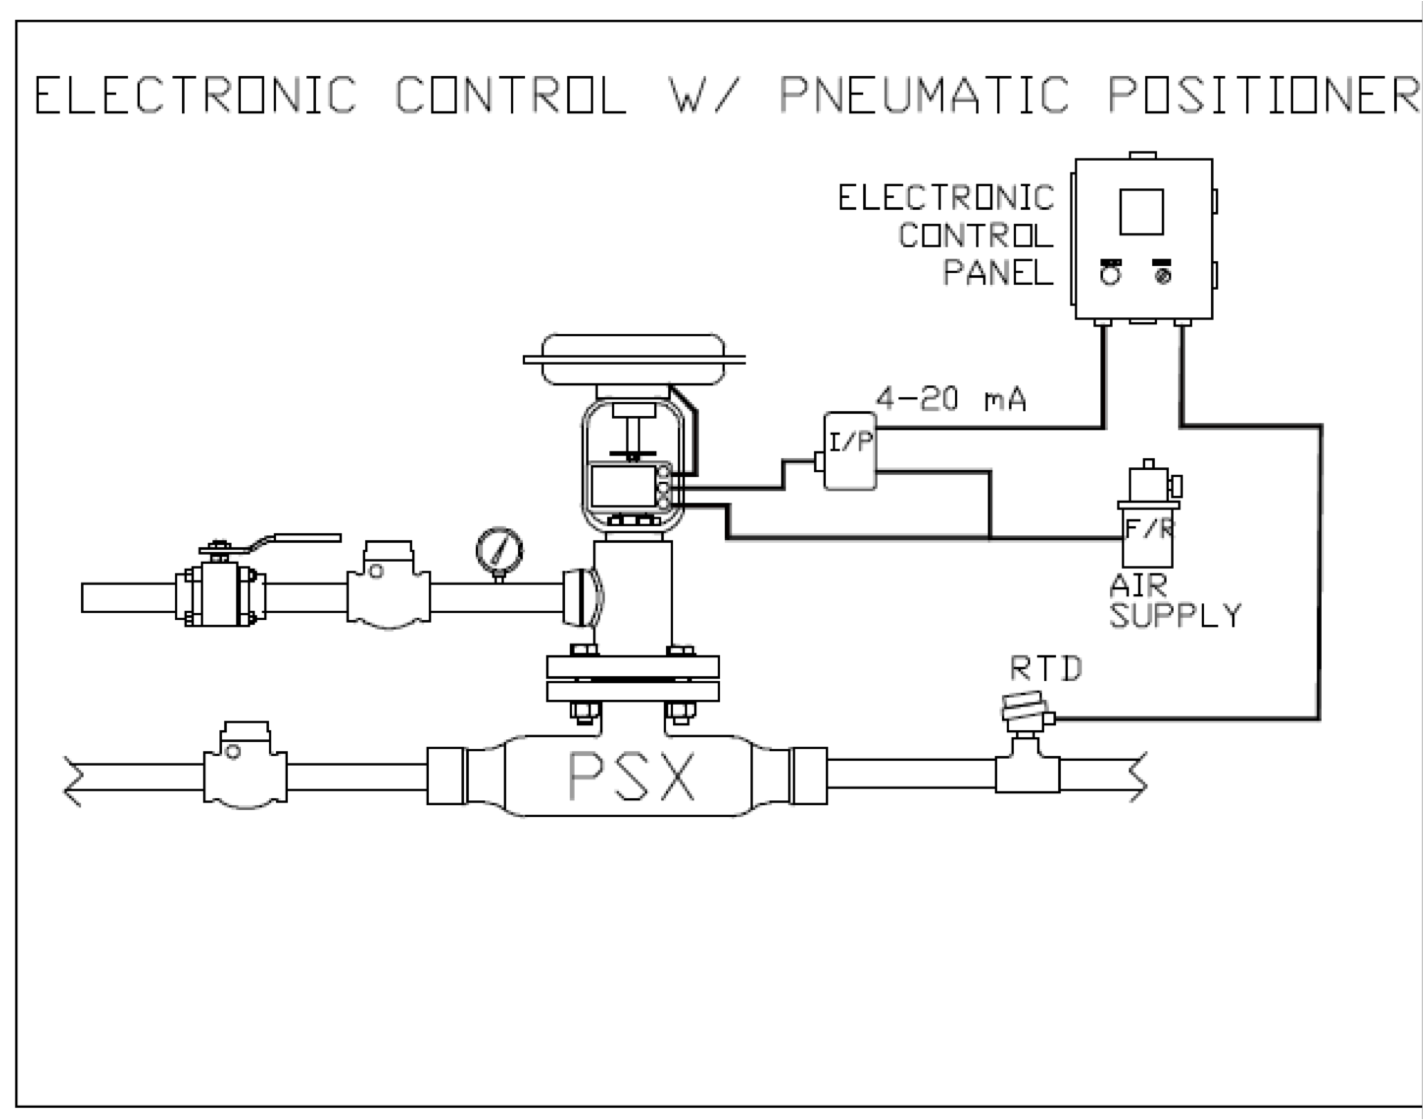 Pneumatic Positioner with Air Input Control Signal